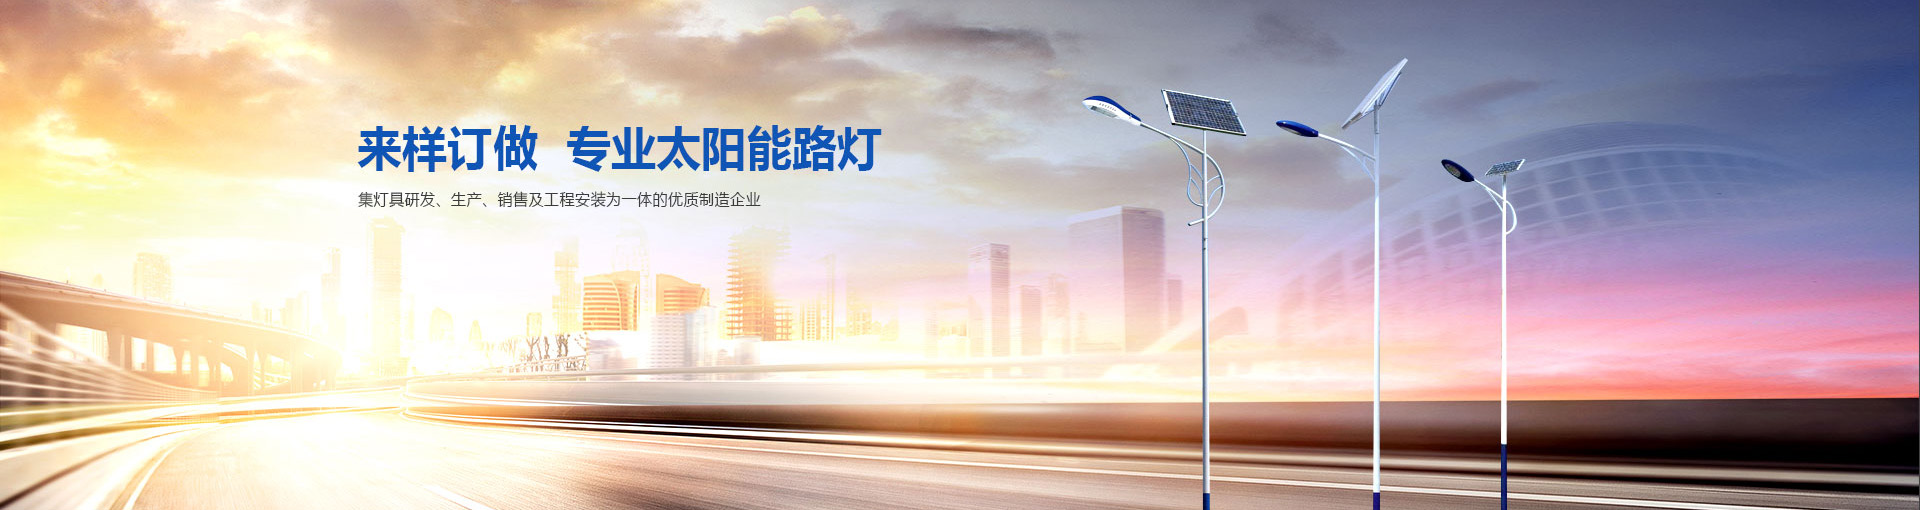 Products-Solar integrated street light-pude-yzl